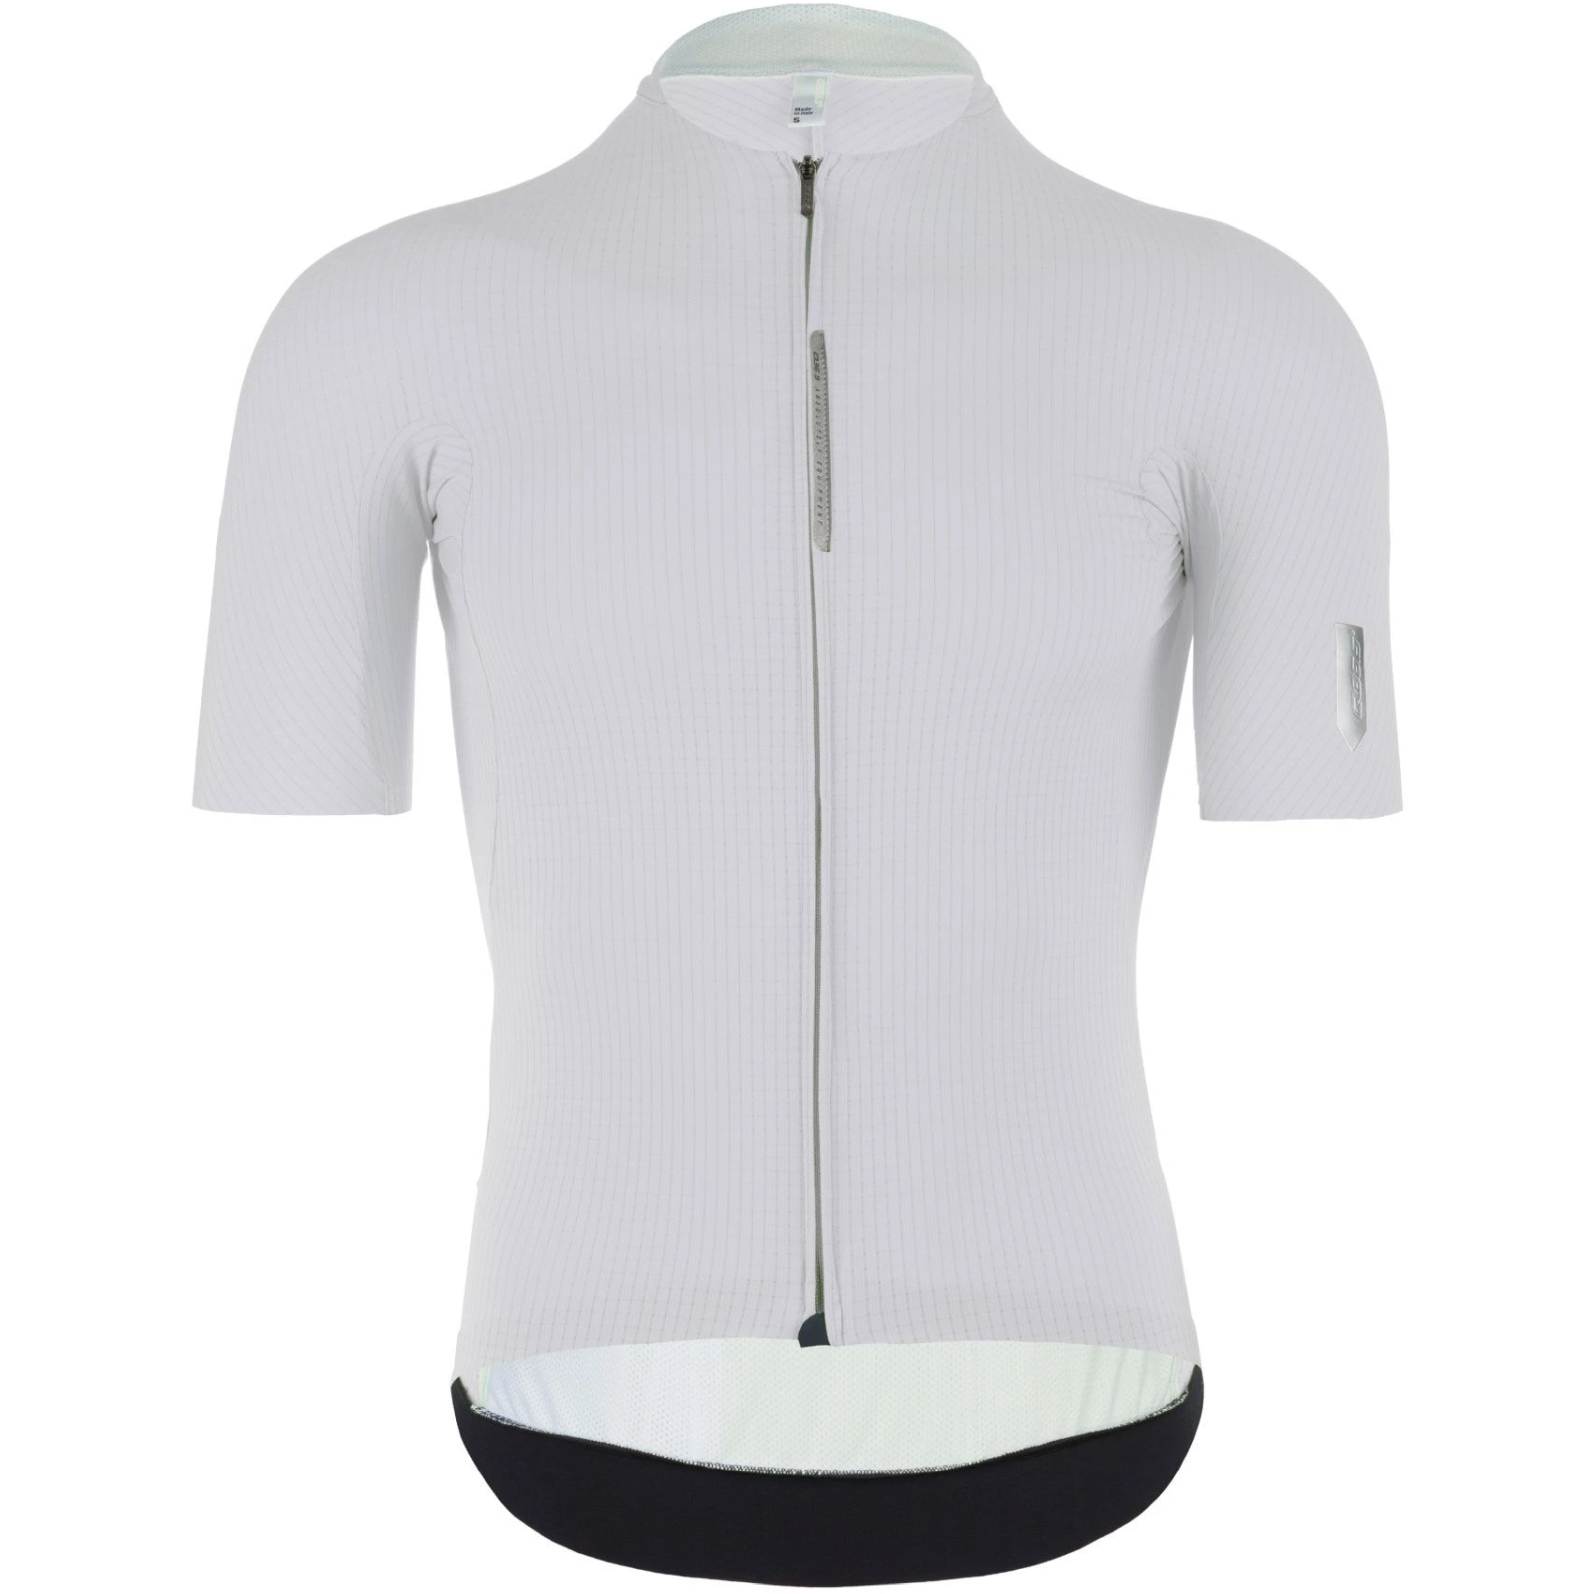 Picture of Q36.5 Pinstripe Pro Short Sleeve Jersey Men - ice grey